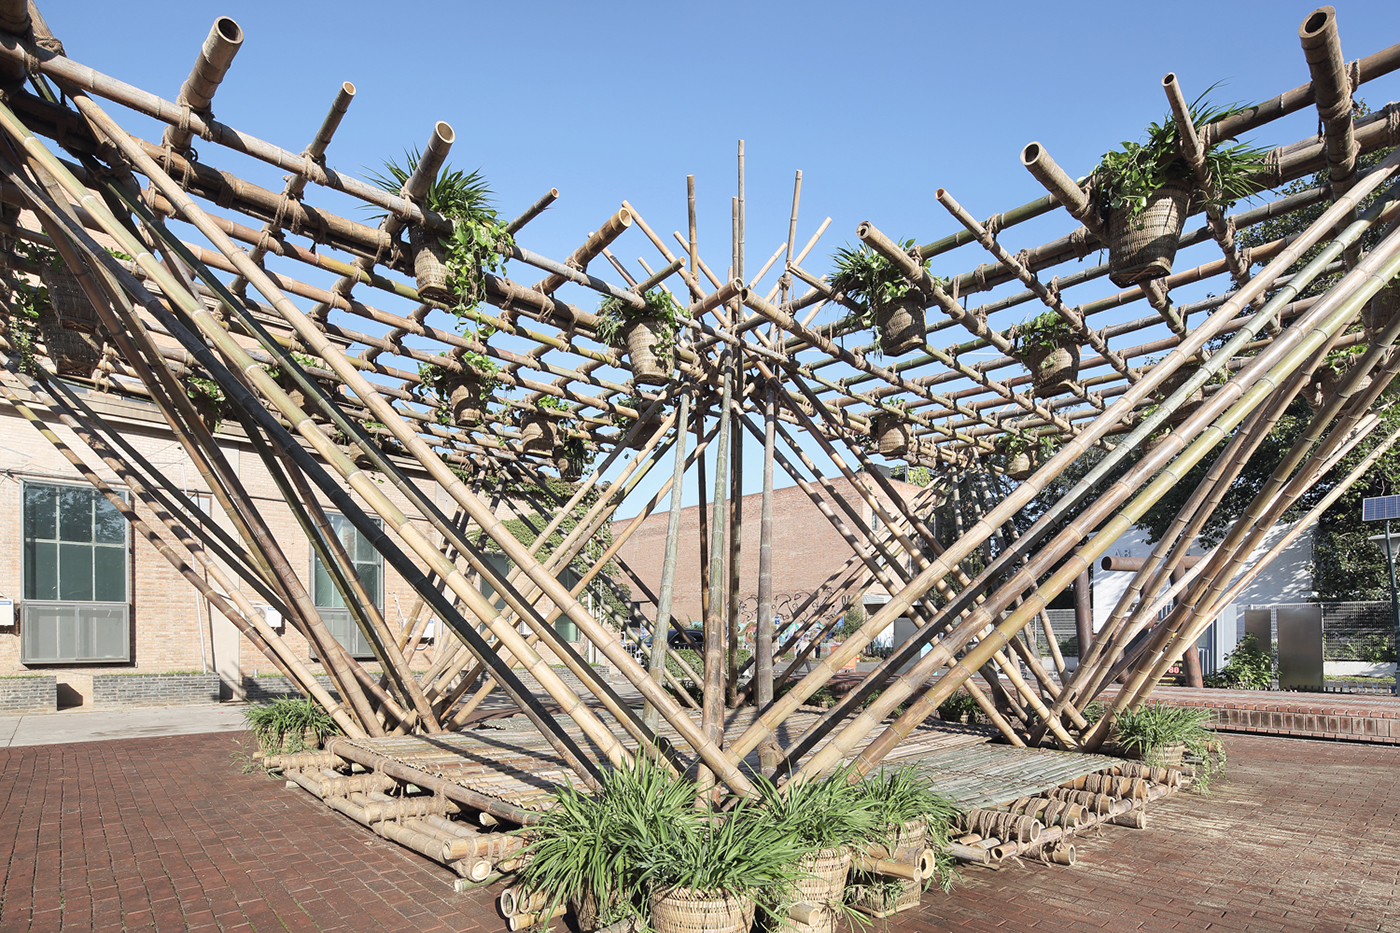 Penda bamboo structure diagrid Nature plants forest material ecological Sustainability green modular system chris